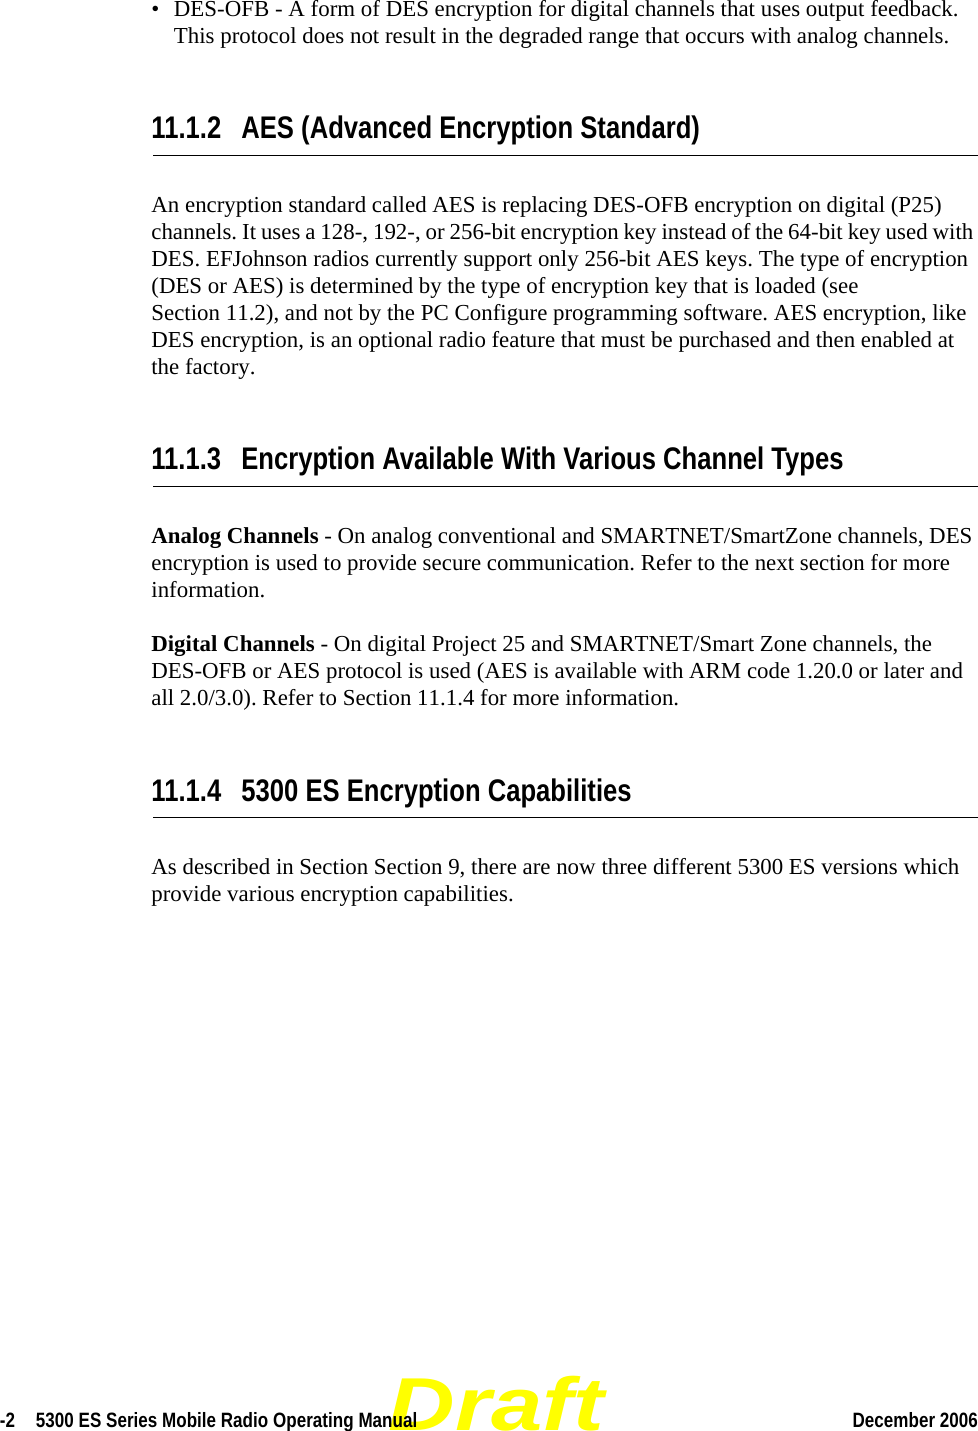 Draft-2  5300 ES Series Mobile Radio Operating Manual December 2006 • DES-OFB - A form of DES encryption for digital channels that uses output feedback. This protocol does not result in the degraded range that occurs with analog channels.11.1.2 AES (Advanced Encryption Standard)An encryption standard called AES is replacing DES-OFB encryption on digital (P25) channels. It uses a 128-, 192-, or 256-bit encryption key instead of the 64-bit key used with DES. EFJohnson radios currently support only 256-bit AES keys. The type of encryption (DES or AES) is determined by the type of encryption key that is loaded (see Section 11.2), and not by the PC Configure programming software. AES encryption, like DES encryption, is an optional radio feature that must be purchased and then enabled at the factory.11.1.3 Encryption Available With Various Channel TypesAnalog Channels - On analog conventional and SMARTNET/SmartZone channels, DES encryption is used to provide secure communication. Refer to the next section for more information.Digital Channels - On digital Project 25 and SMARTNET/Smart Zone channels, the DES-OFB or AES protocol is used (AES is available with ARM code 1.20.0 or later and all 2.0/3.0). Refer to Section 11.1.4 for more information.11.1.4 5300 ES Encryption CapabilitiesAs described in Section Section 9, there are now three different 5300 ES versions which provide various encryption capabilities.